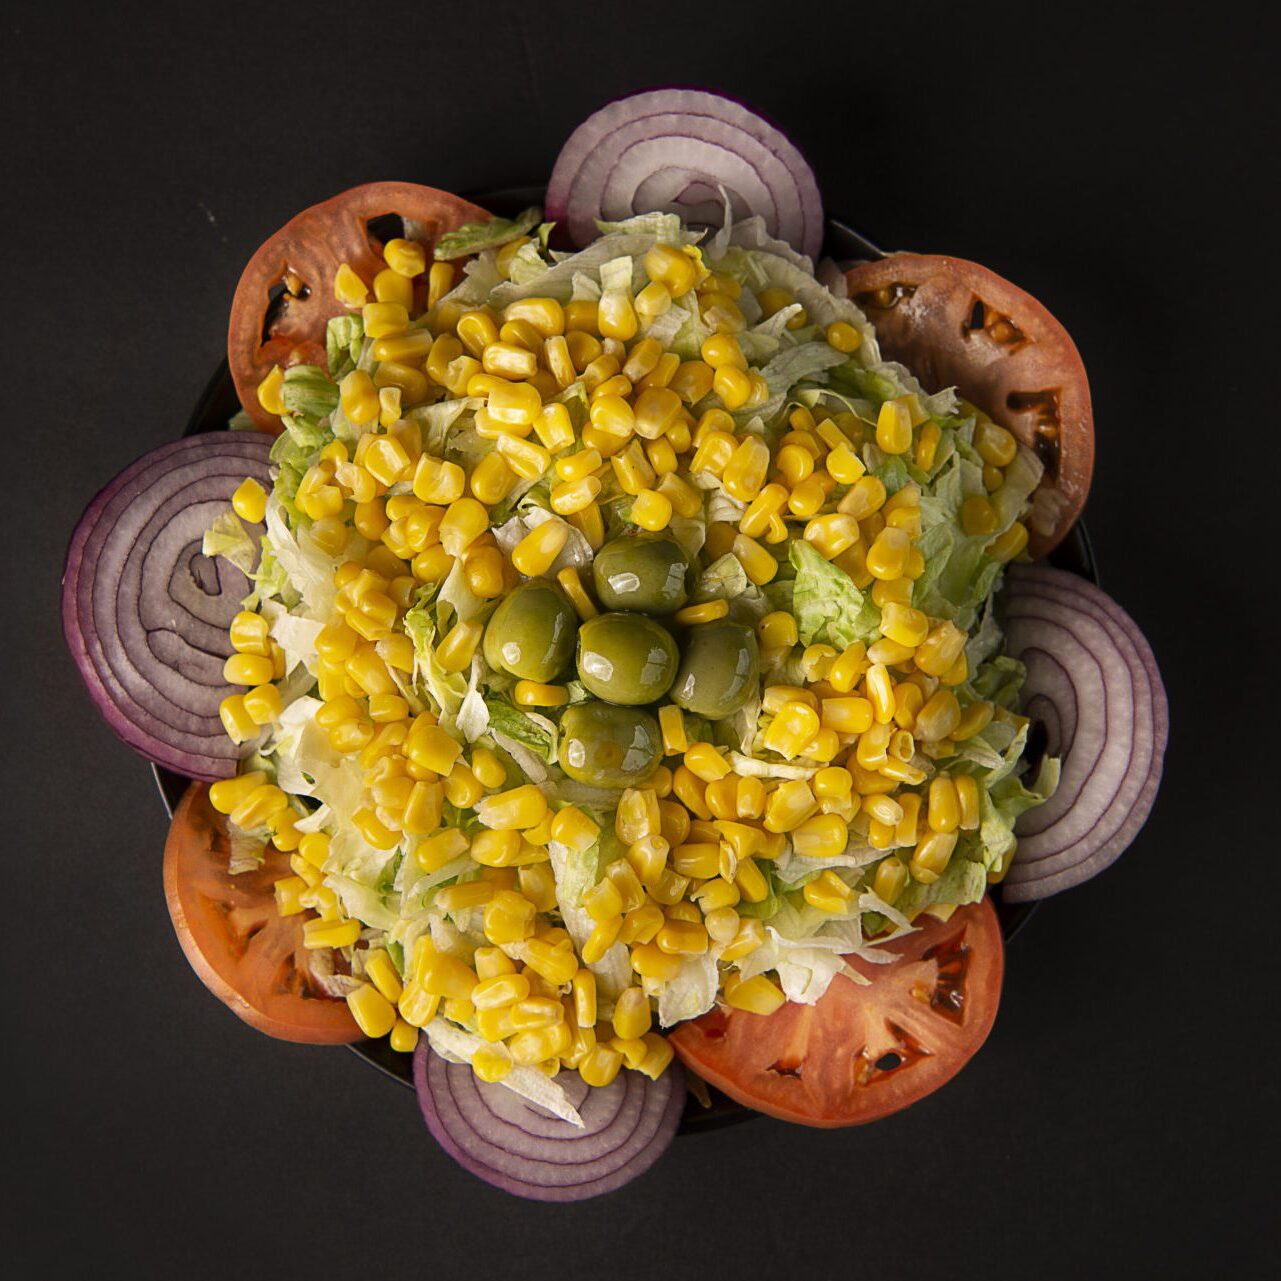 A bowl of corn, tomatoes and onions on top of black surface.